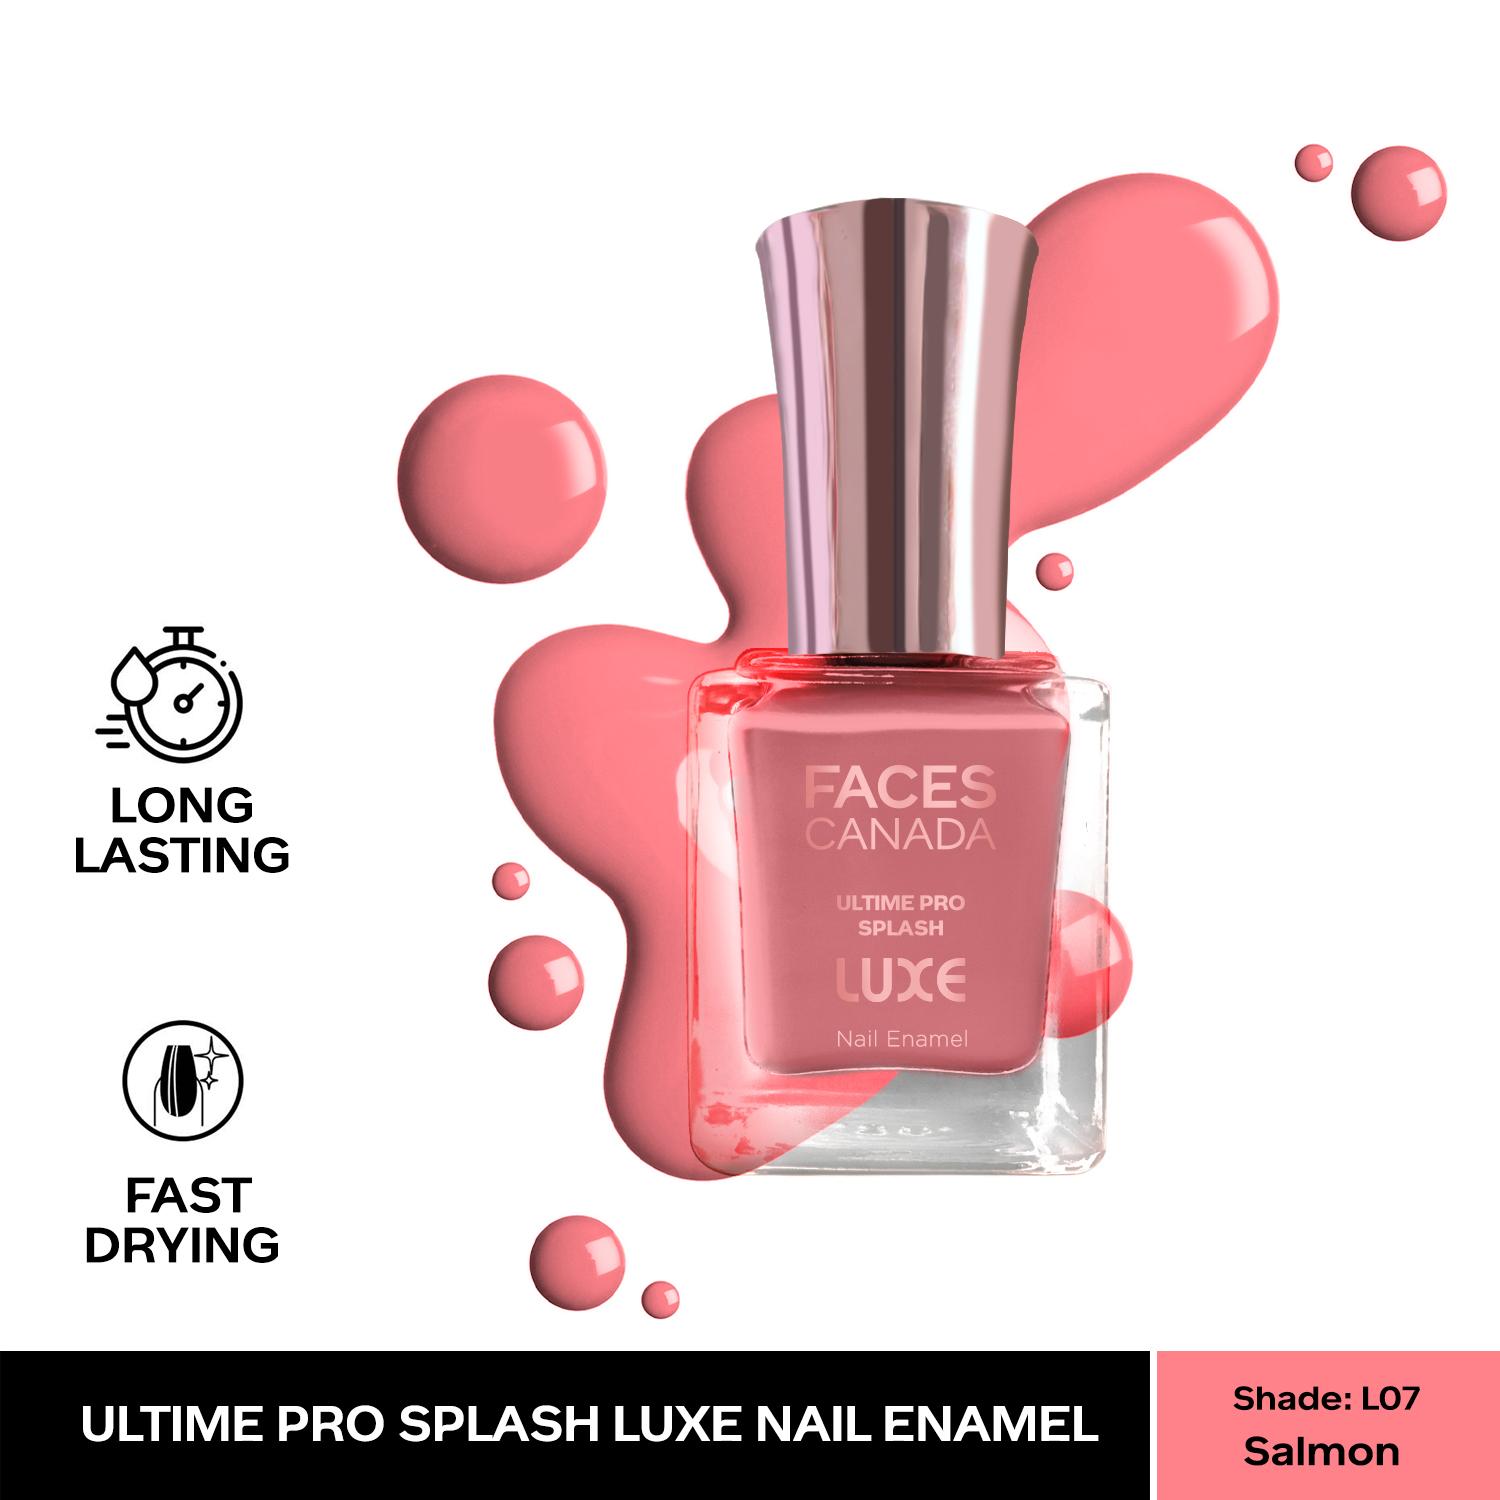 Faces Canada | Faces Canada Ultime Pro Splash Luxe Nail Enamel - Salmon (L07), Glossy Finish (12 ml)